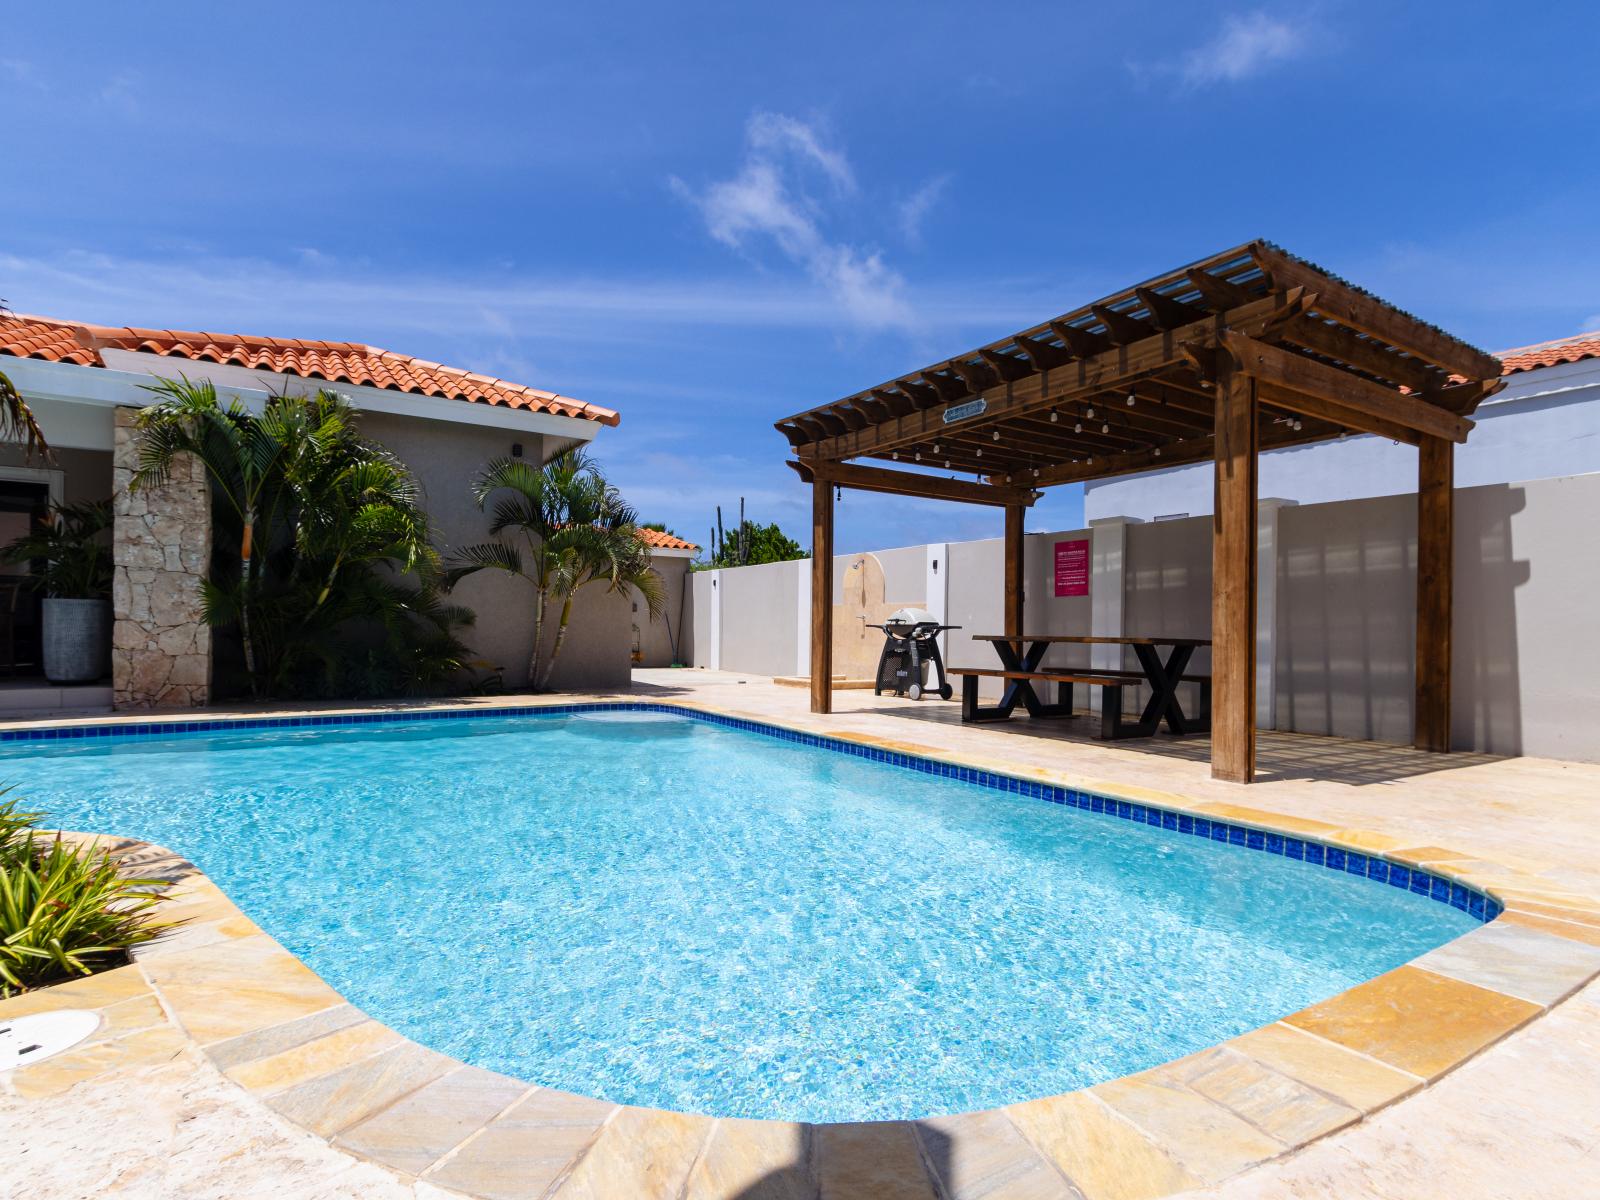 Luxury pool area of the apartment in Noord Aruba - Lush and refreshing environment - Beautifully sunbathed space makes the soul peaceful - Experience the comfort at the best